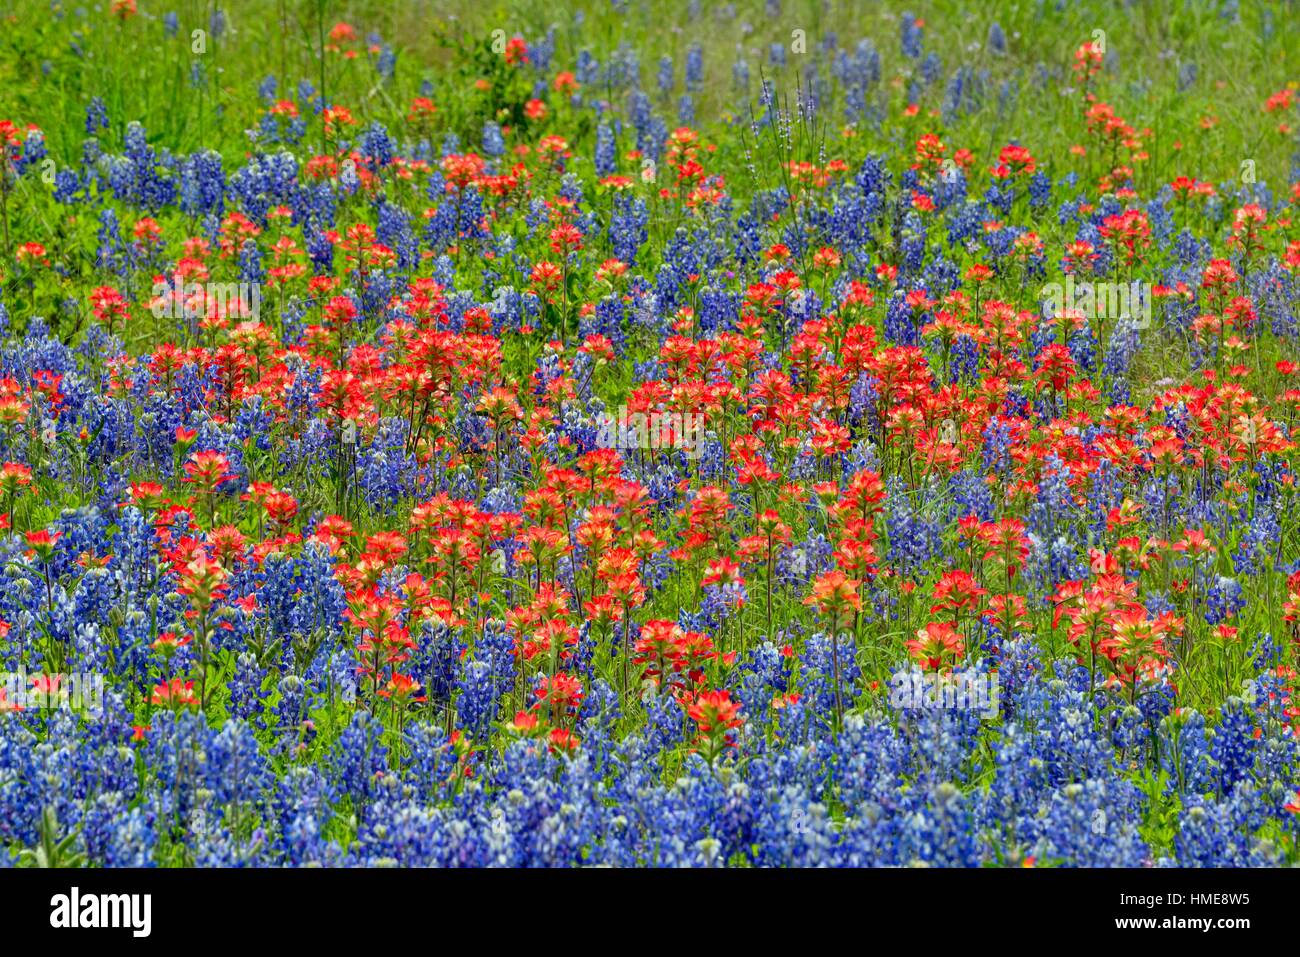 A field with flowering Texas bluebonnet (Lupinus subcarnosus) and Texas paintbrush (Castilleja indivisa), Travis County, Texas, USA. Stock Photo